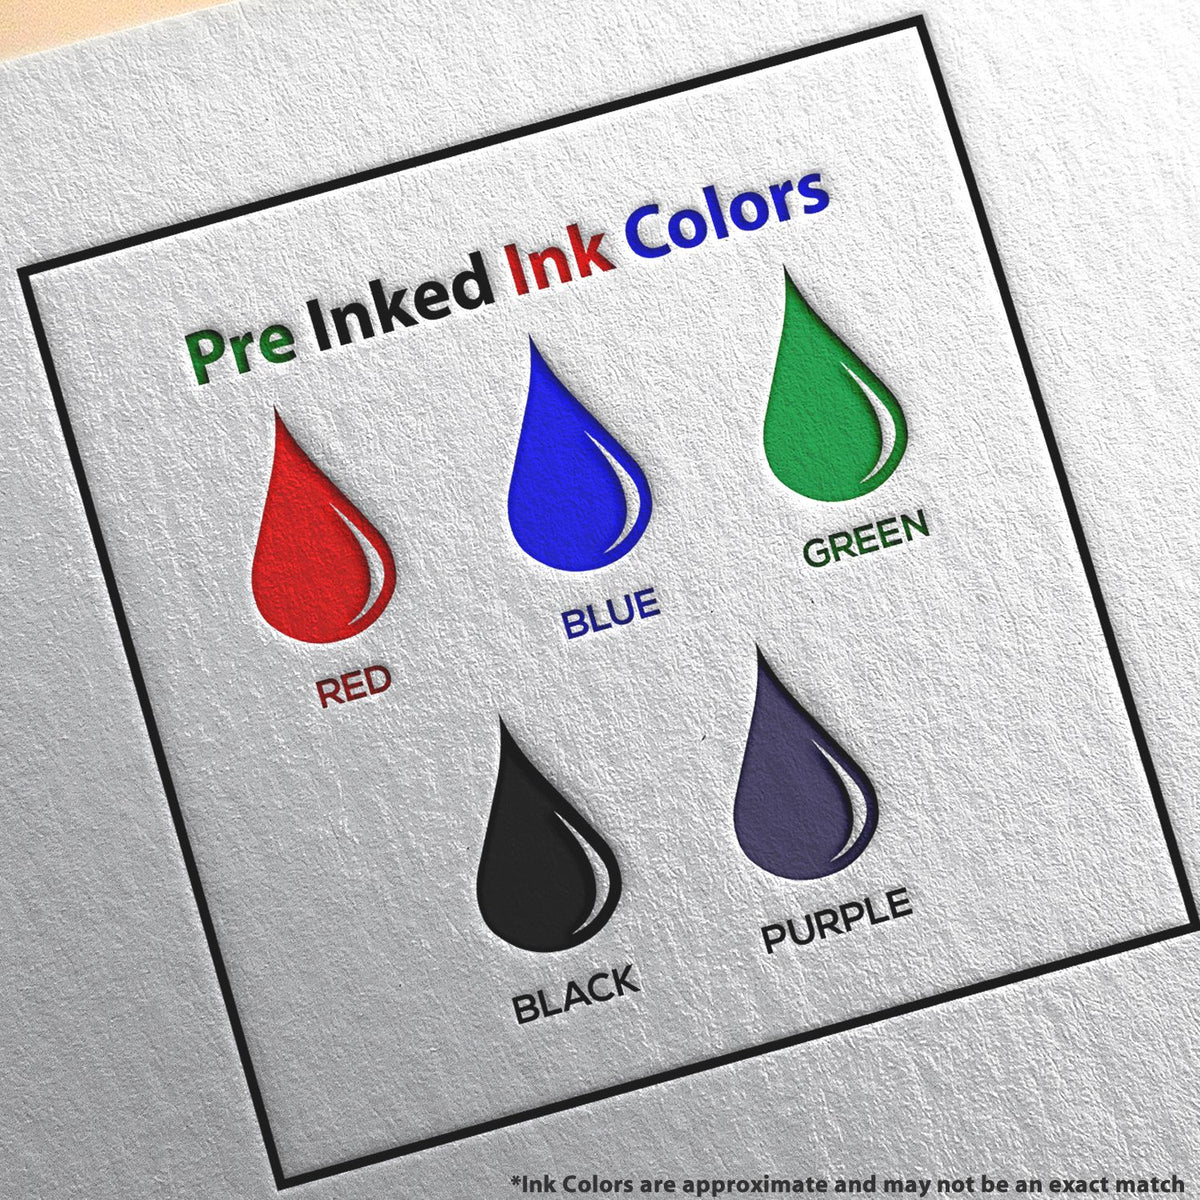 A picture showing the different ink colors or hues available for the Slim Pre-Inked Idaho Land Surveyor Seal Stamp product.